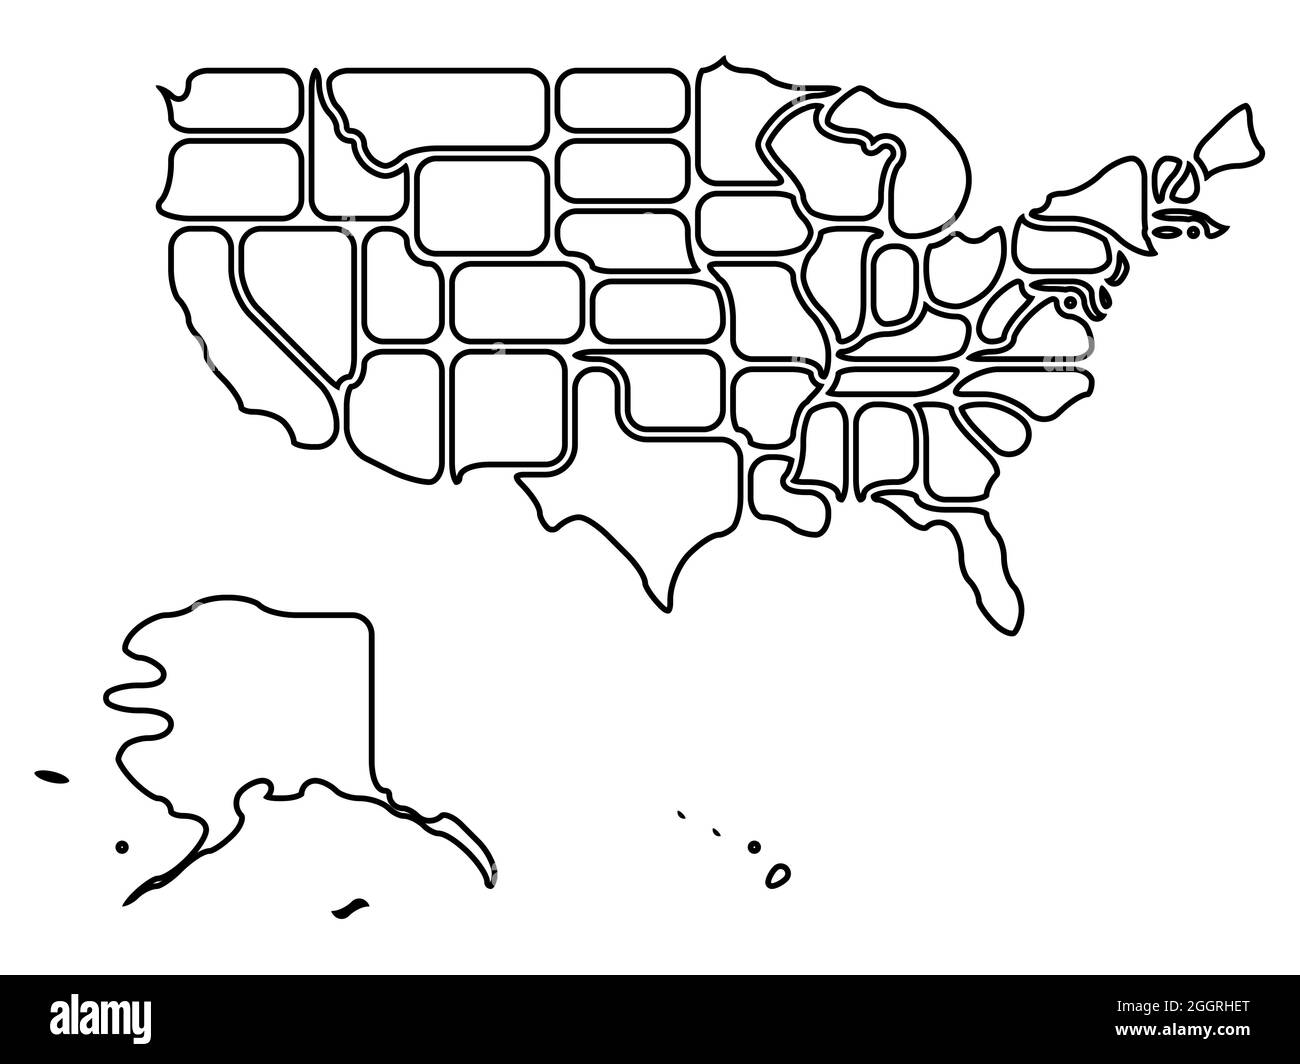 United States map outline - smooth simplified country shape map